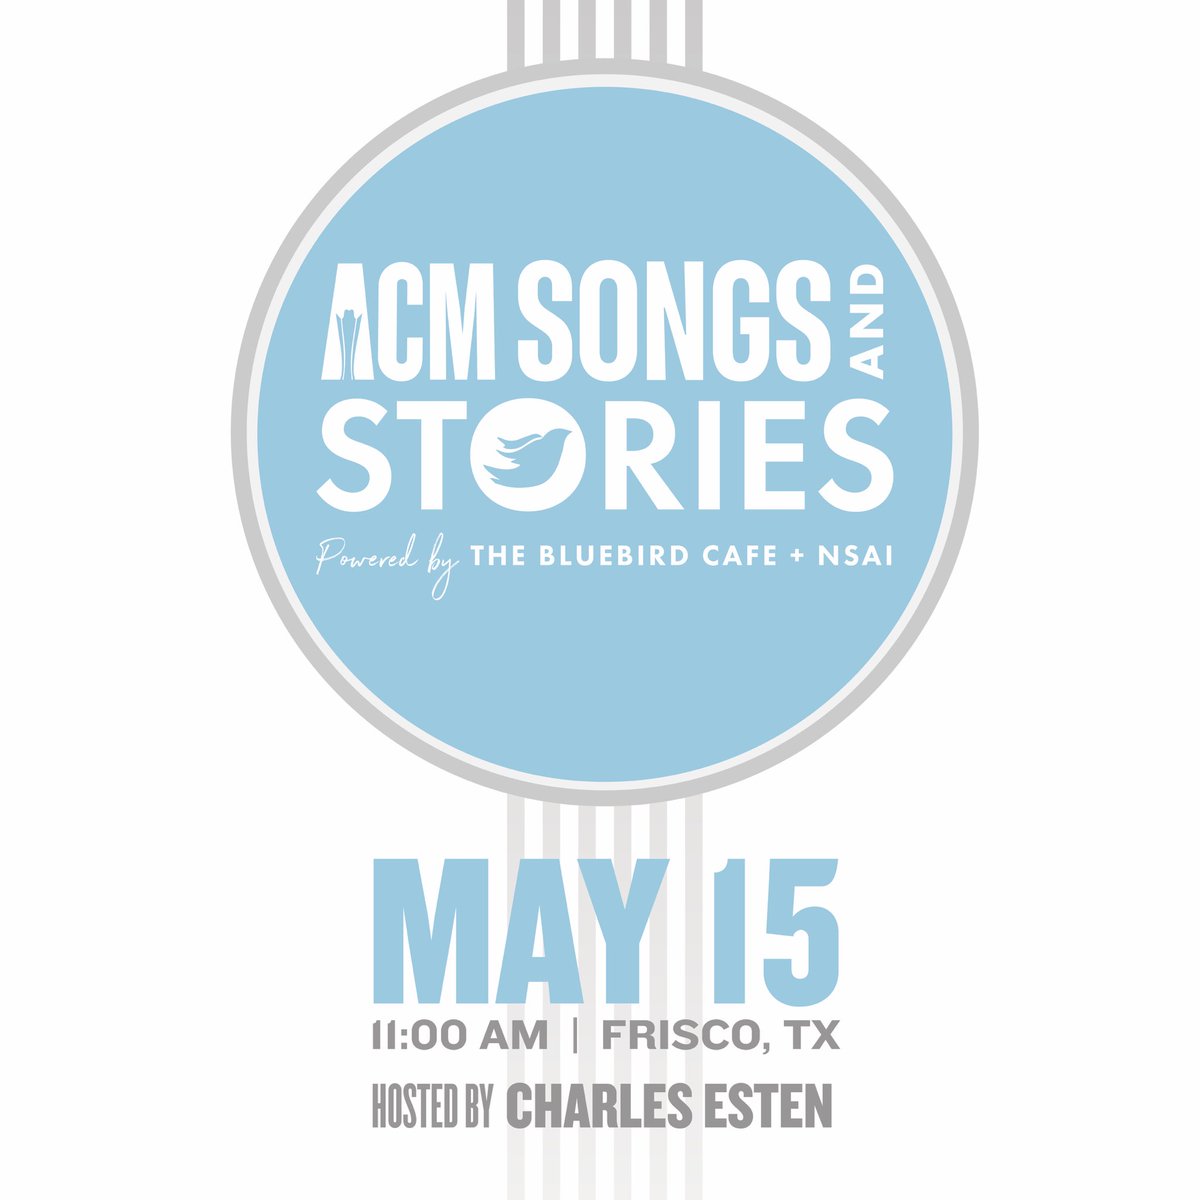 I’m hosting the @ACMawards Songs & Stories Powered by @BluebirdCafeTN & NSAI! Grab your tickets now at seatgeek.com/acm-songs-stor…